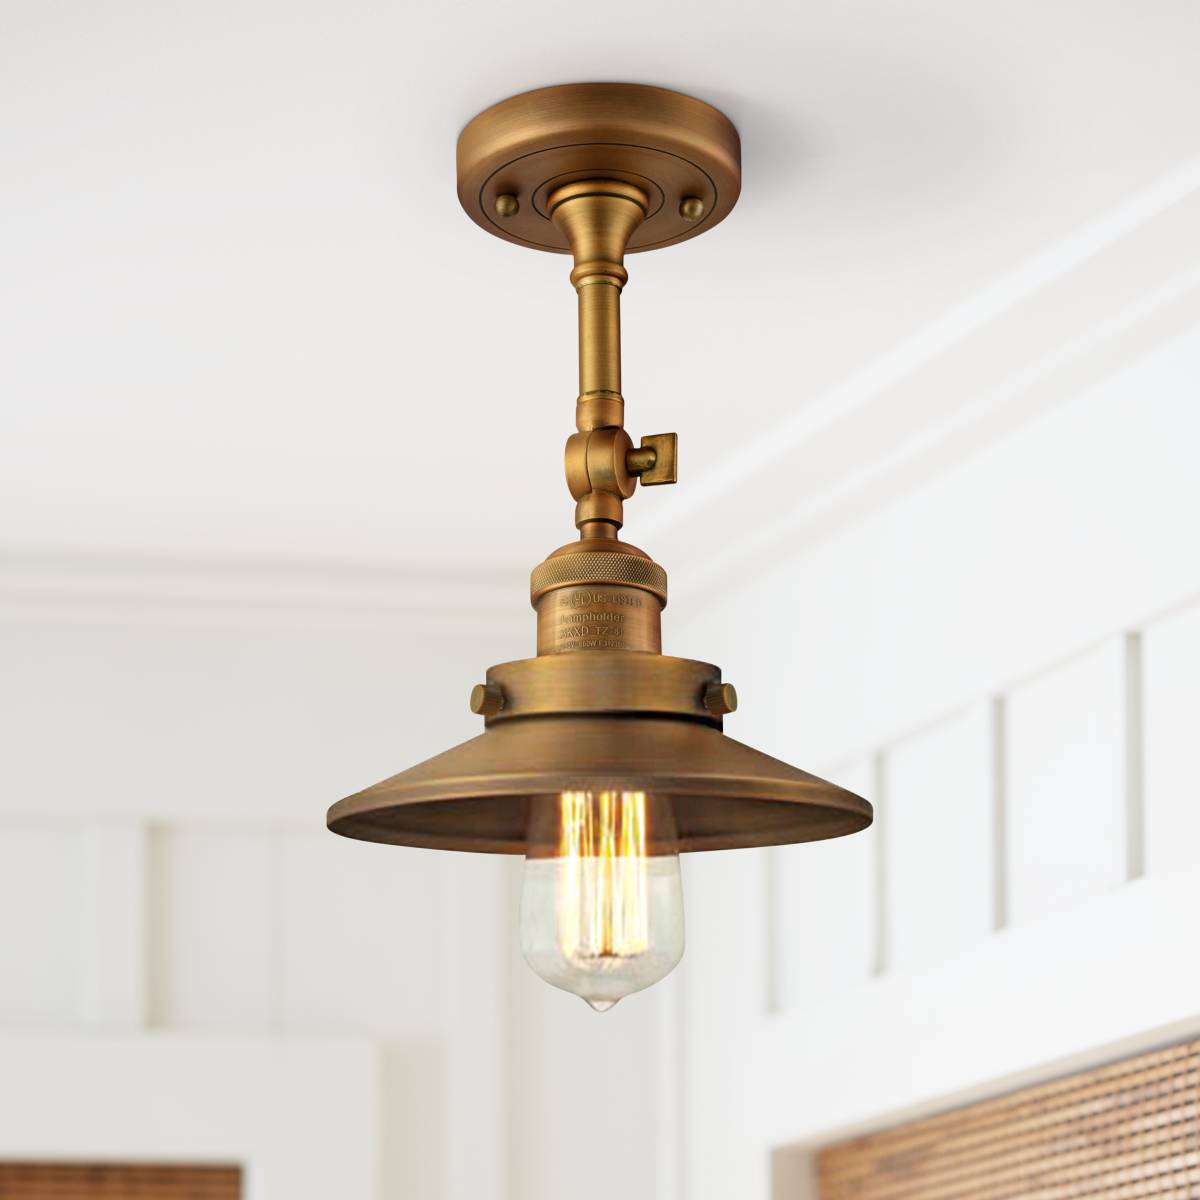 Close to Ceiling Light Fixtures - Decorative Lighting - Page 17 | Lamps ...